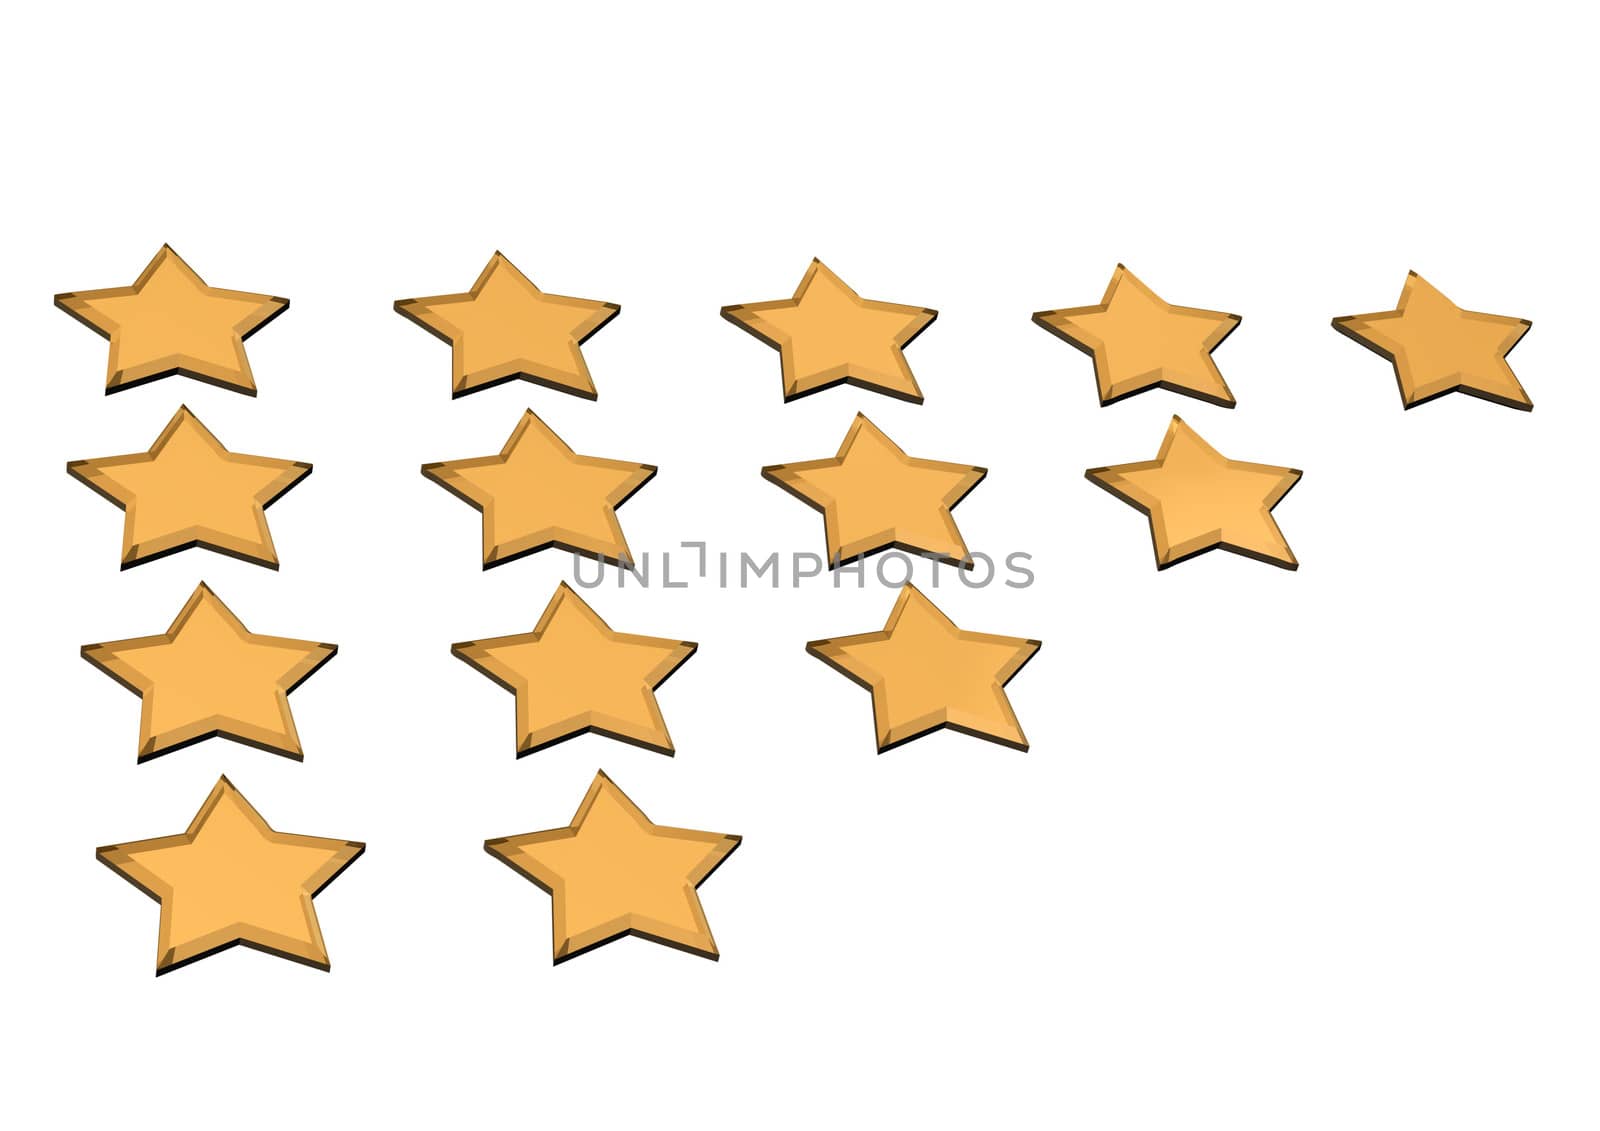 Gold Stars. Isolated on white. Three dimensional render.